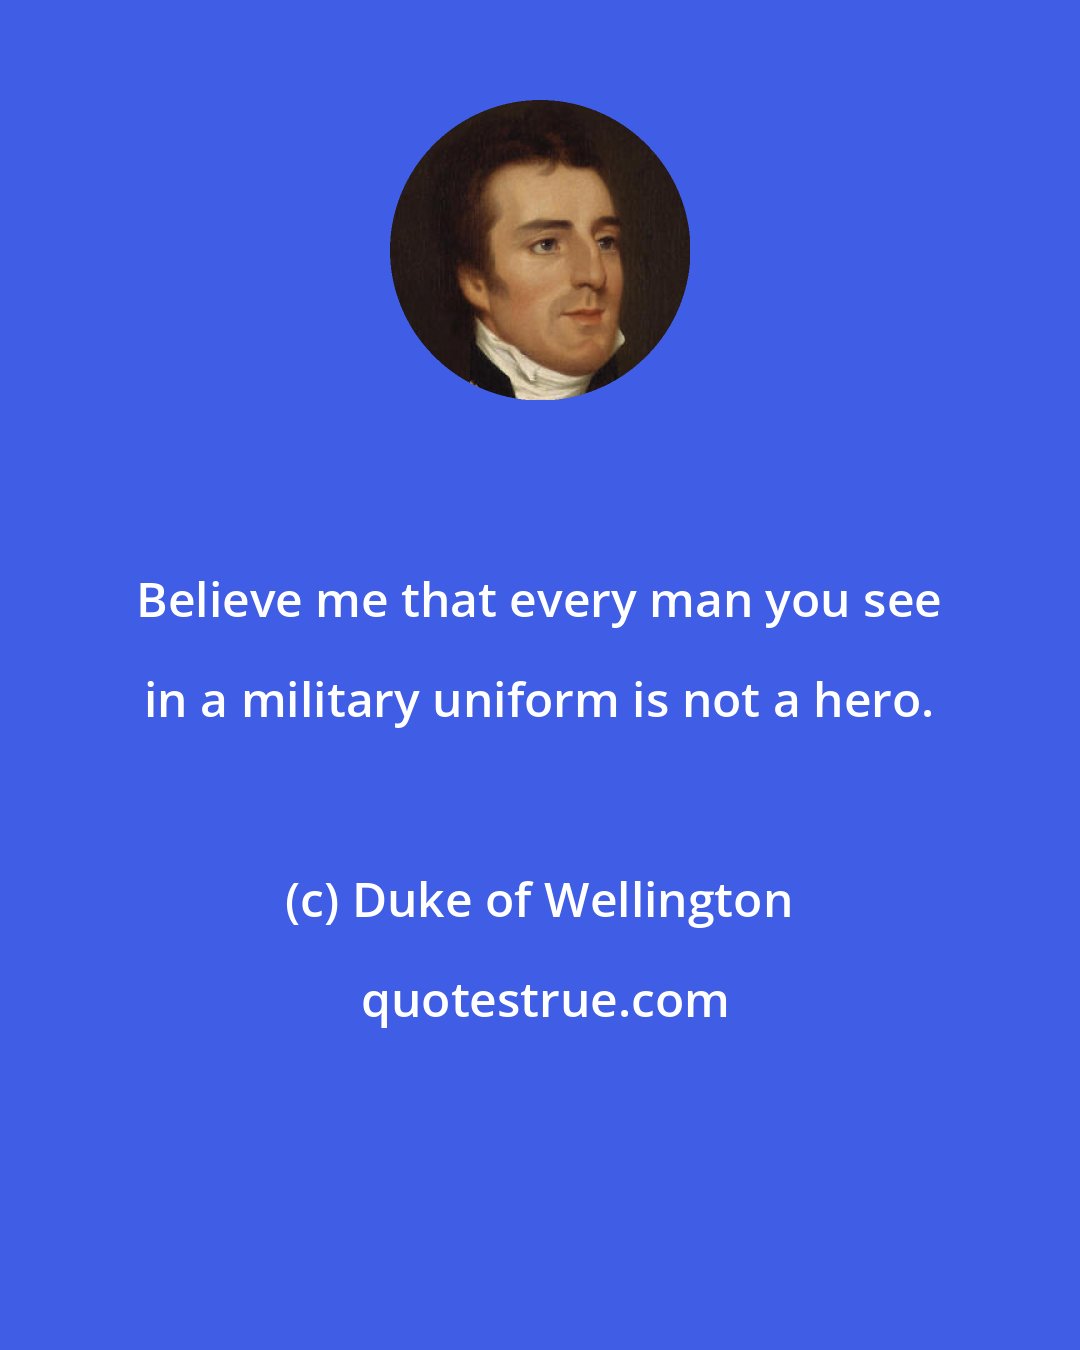 Duke of Wellington: Believe me that every man you see in a military uniform is not a hero.